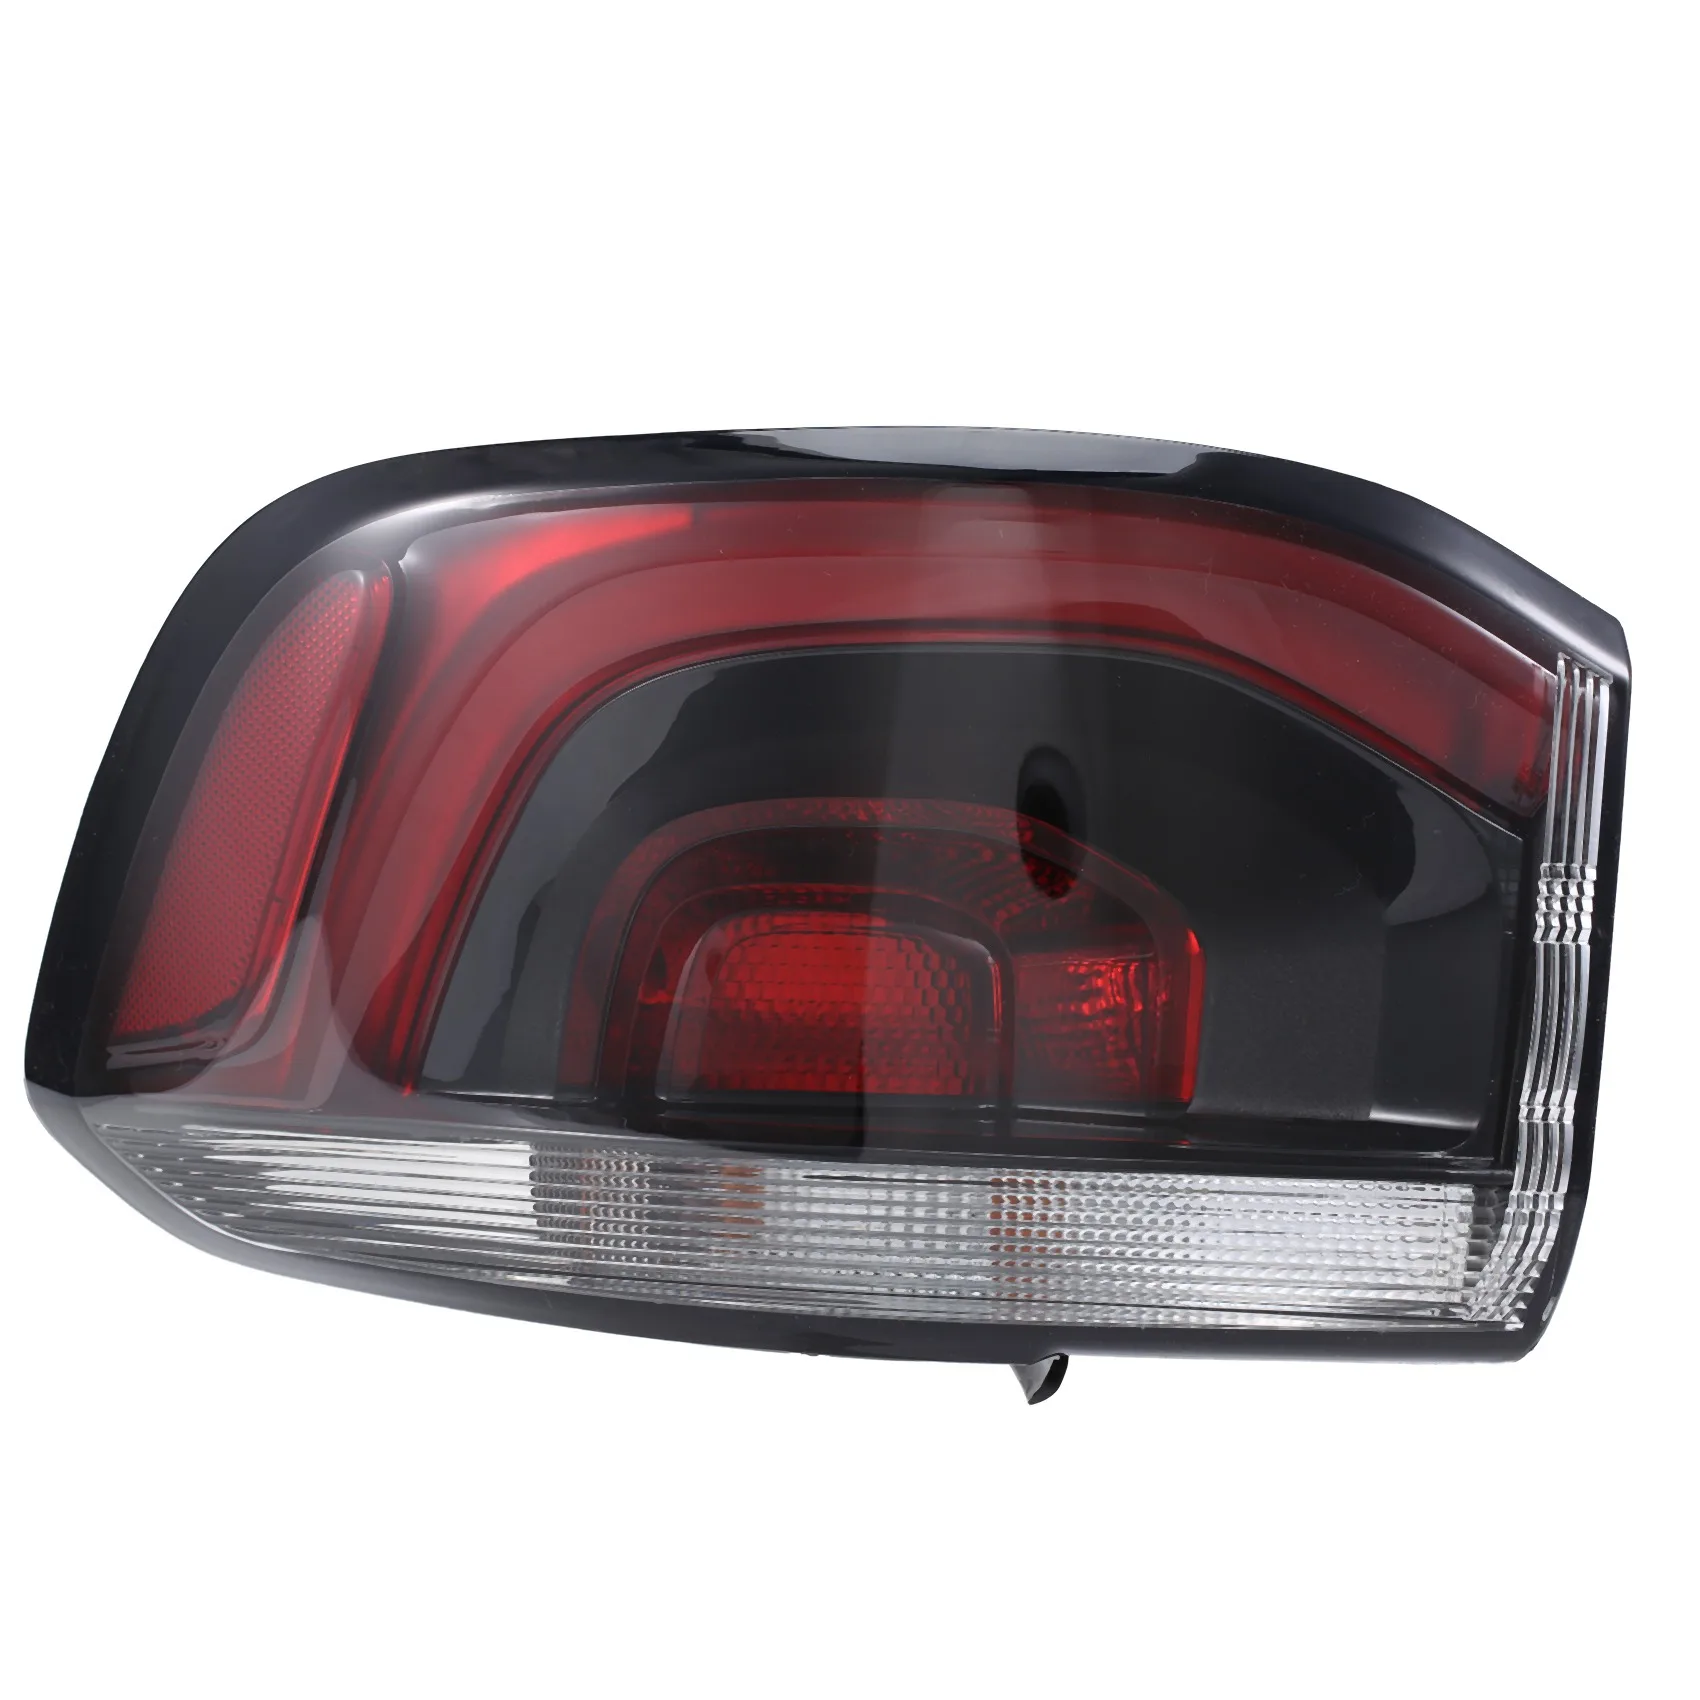 

Car Rear Right Outer Tail Light Turn Signal Taillights Brake Warning Lamp for-Jeep Compass 2017-2019